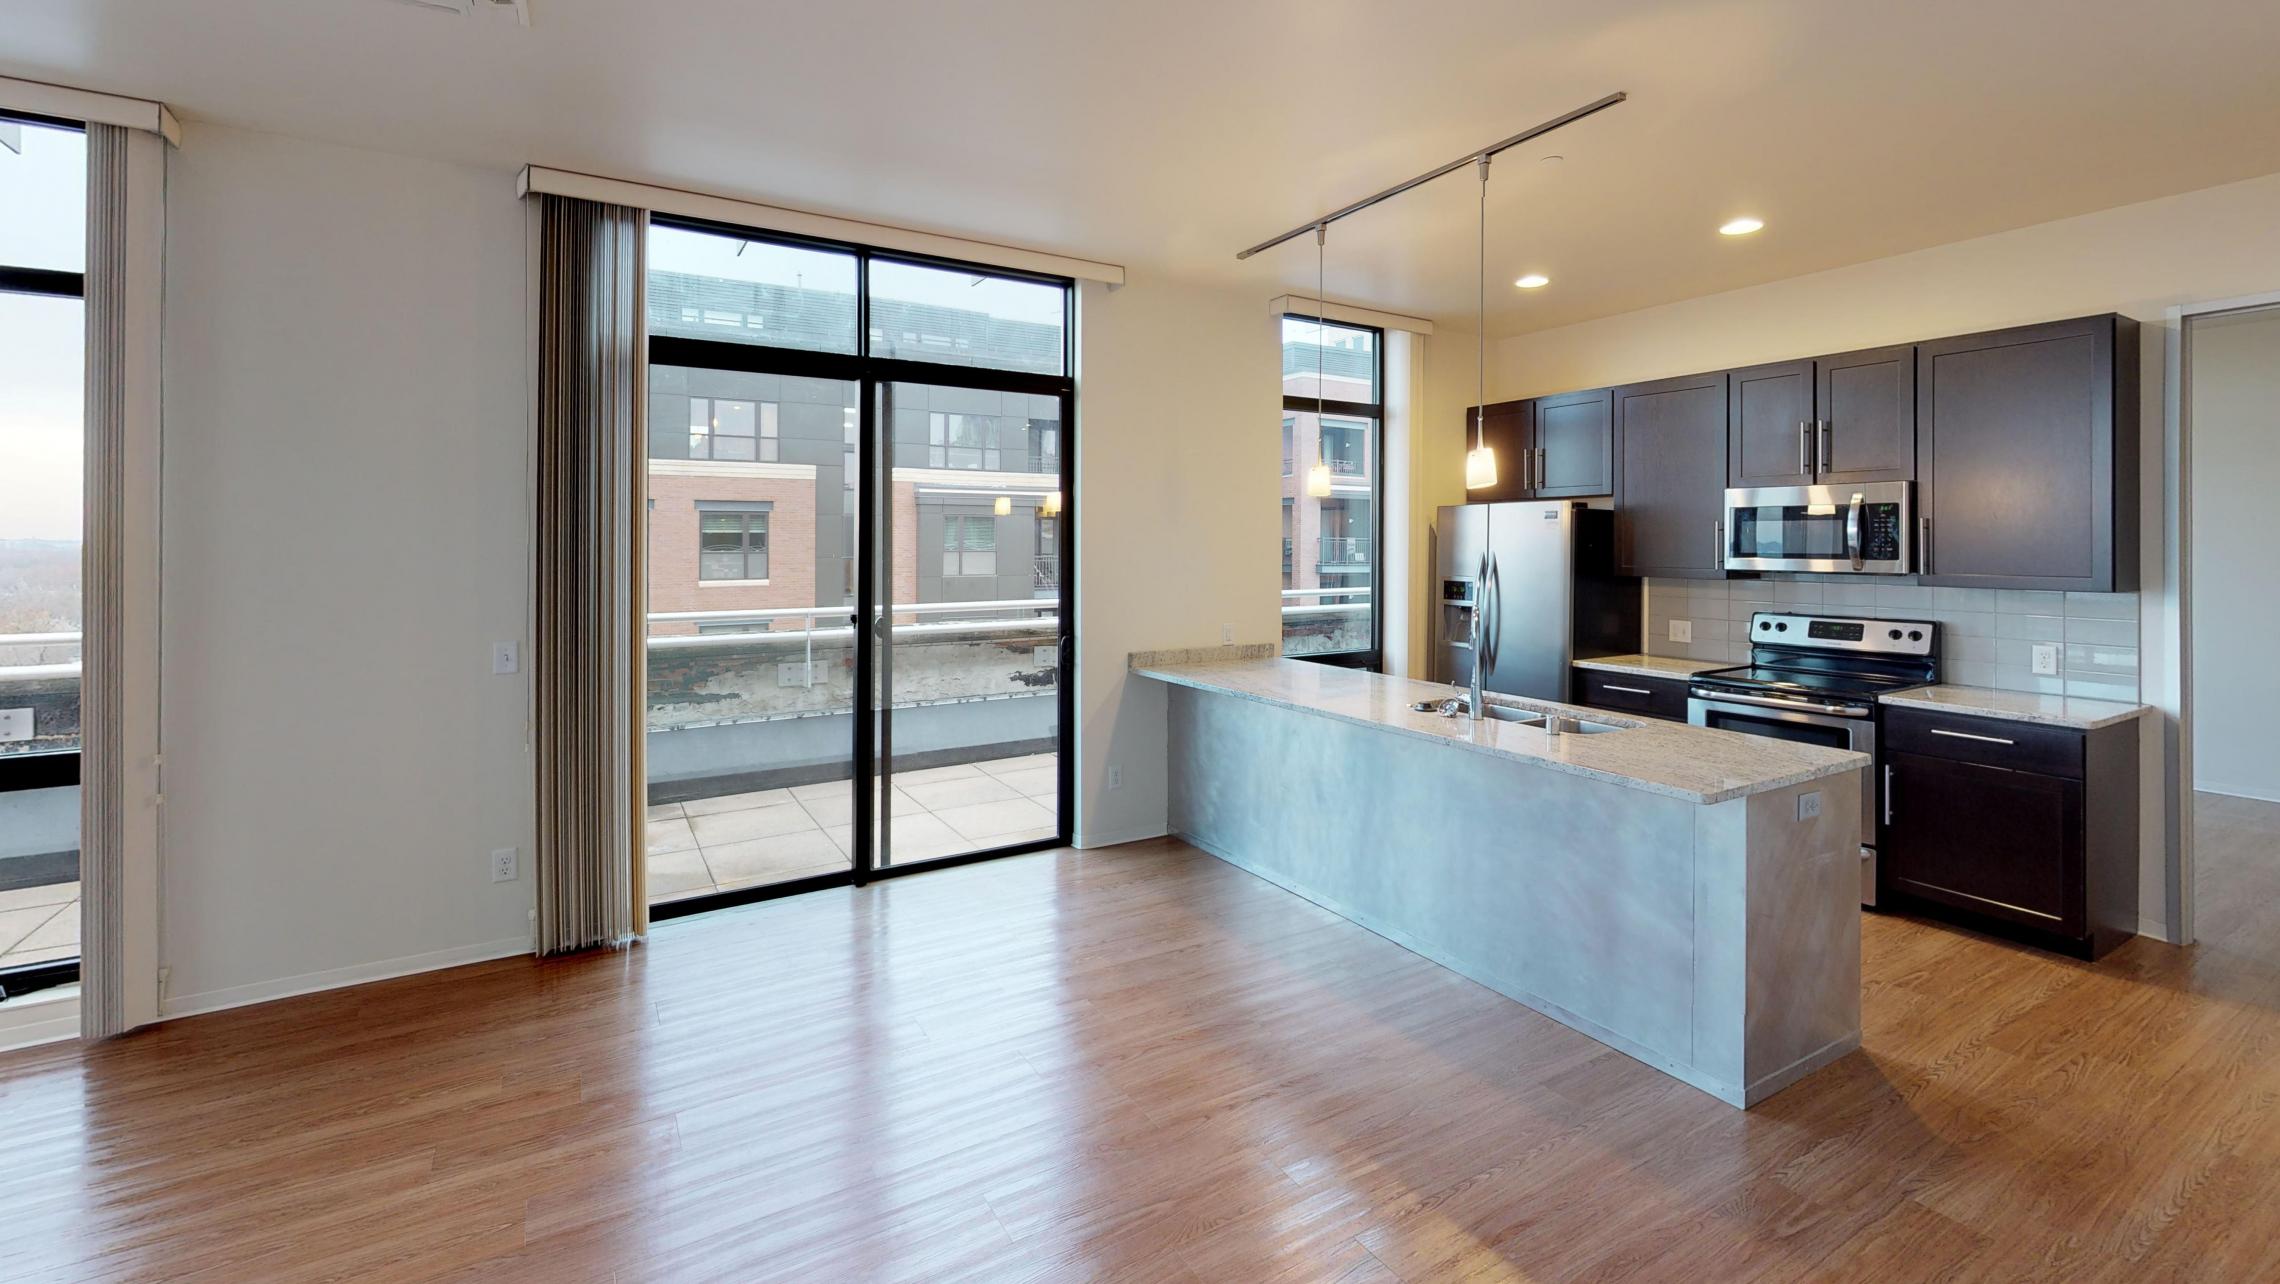 Capitol-Hill-Apartment-501-Two-Bedroom-Corner-Terrace-Lake-Capitol-Square-Downtown-Madison-Modern-Design-Lifestyle-Upscale-Luxury-Cats-Views-City-Bathroom-Storage-Kitchen